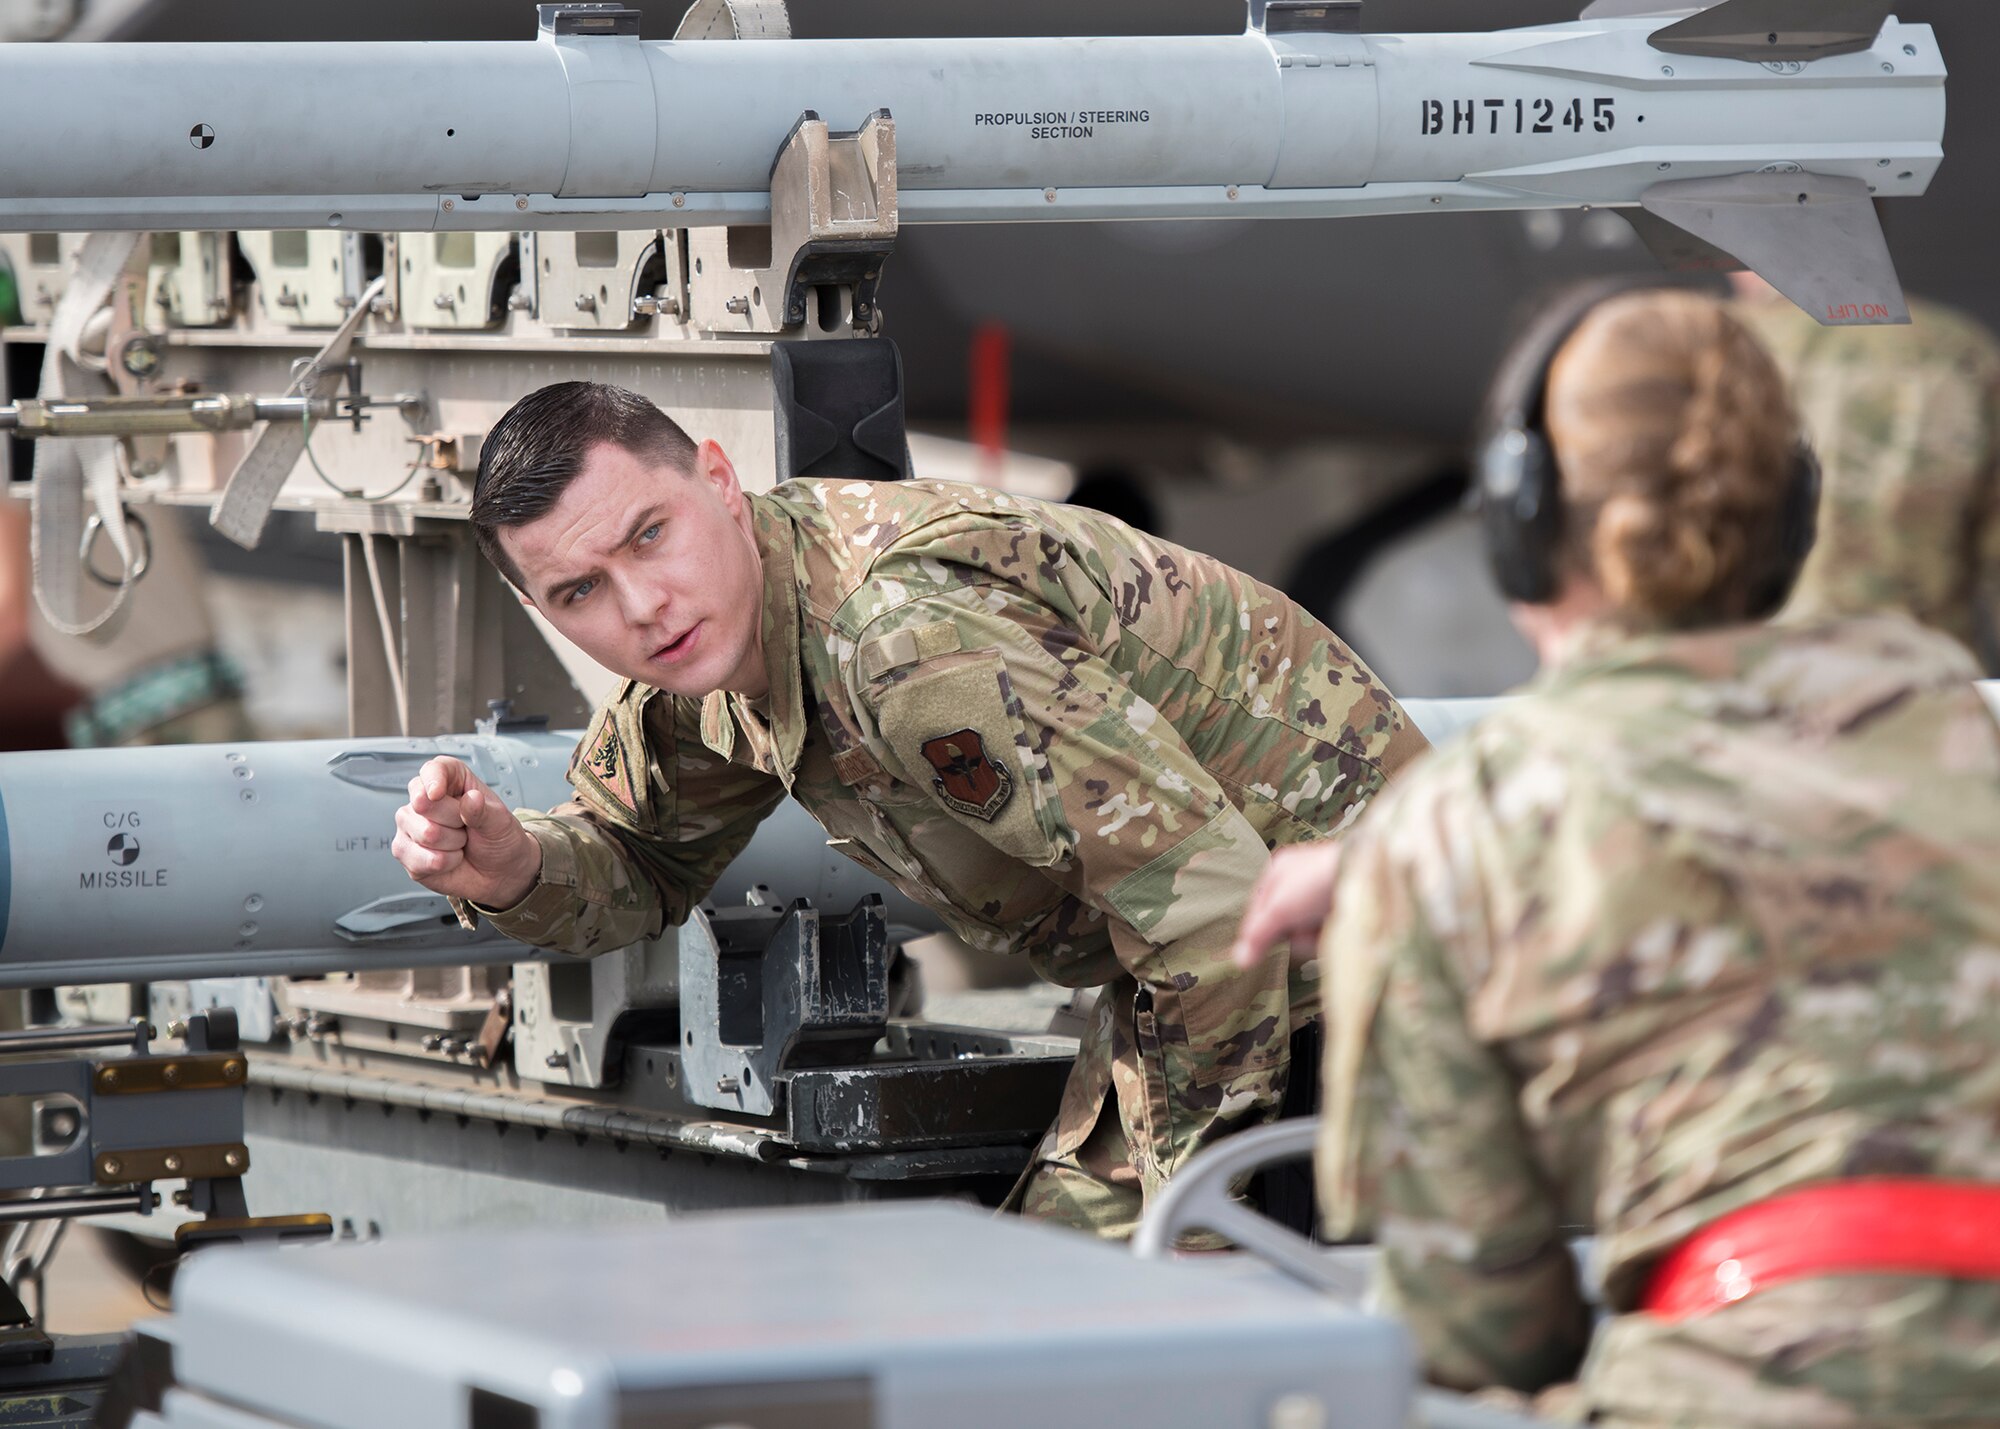 Staff Sgt. Tyler James McGovern, 63rd Aircraft Maintenance Unit weapons load crew chief, guides Airman 1st Class Amanda Knutson, 63rd AMU weapons load crew member, as she approaches an aircraft in a jammer during the Annual Load Crew Competition, Jan. 24, 2020, at Luke Air Force Base, Ariz.